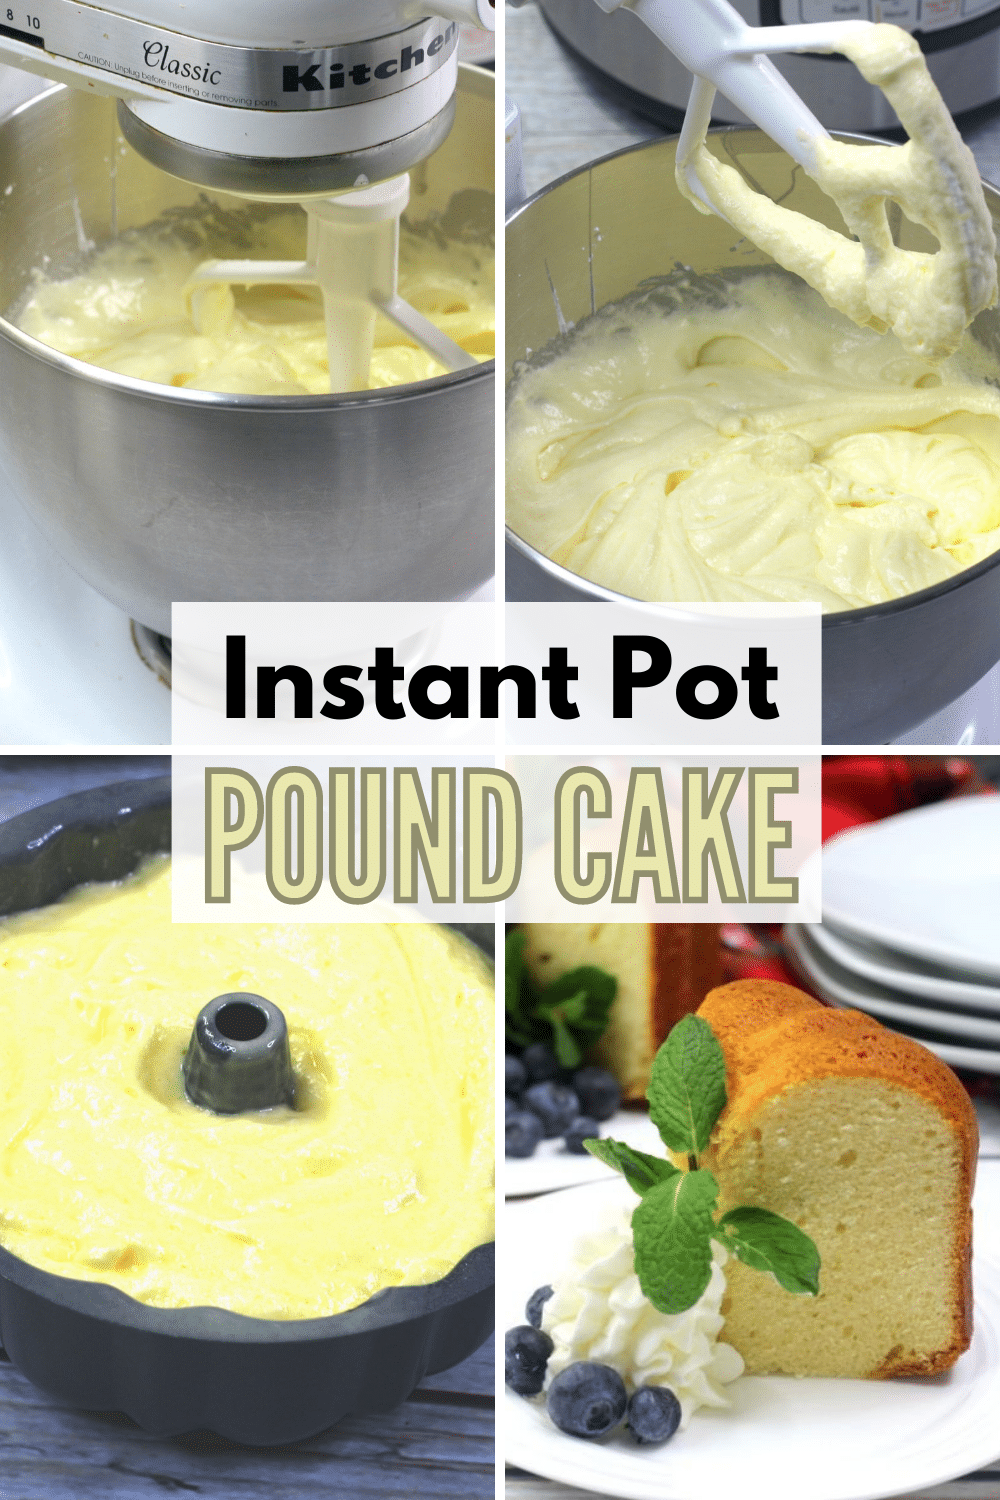 Instant Pot Pound Cake is one of the best pound cakes you will ever have. It is moist, dense, full of flavor, and perfect for any occasion. #instantpot #pressurecooker #poundcake #dessert #recipe via @wondermomwannab